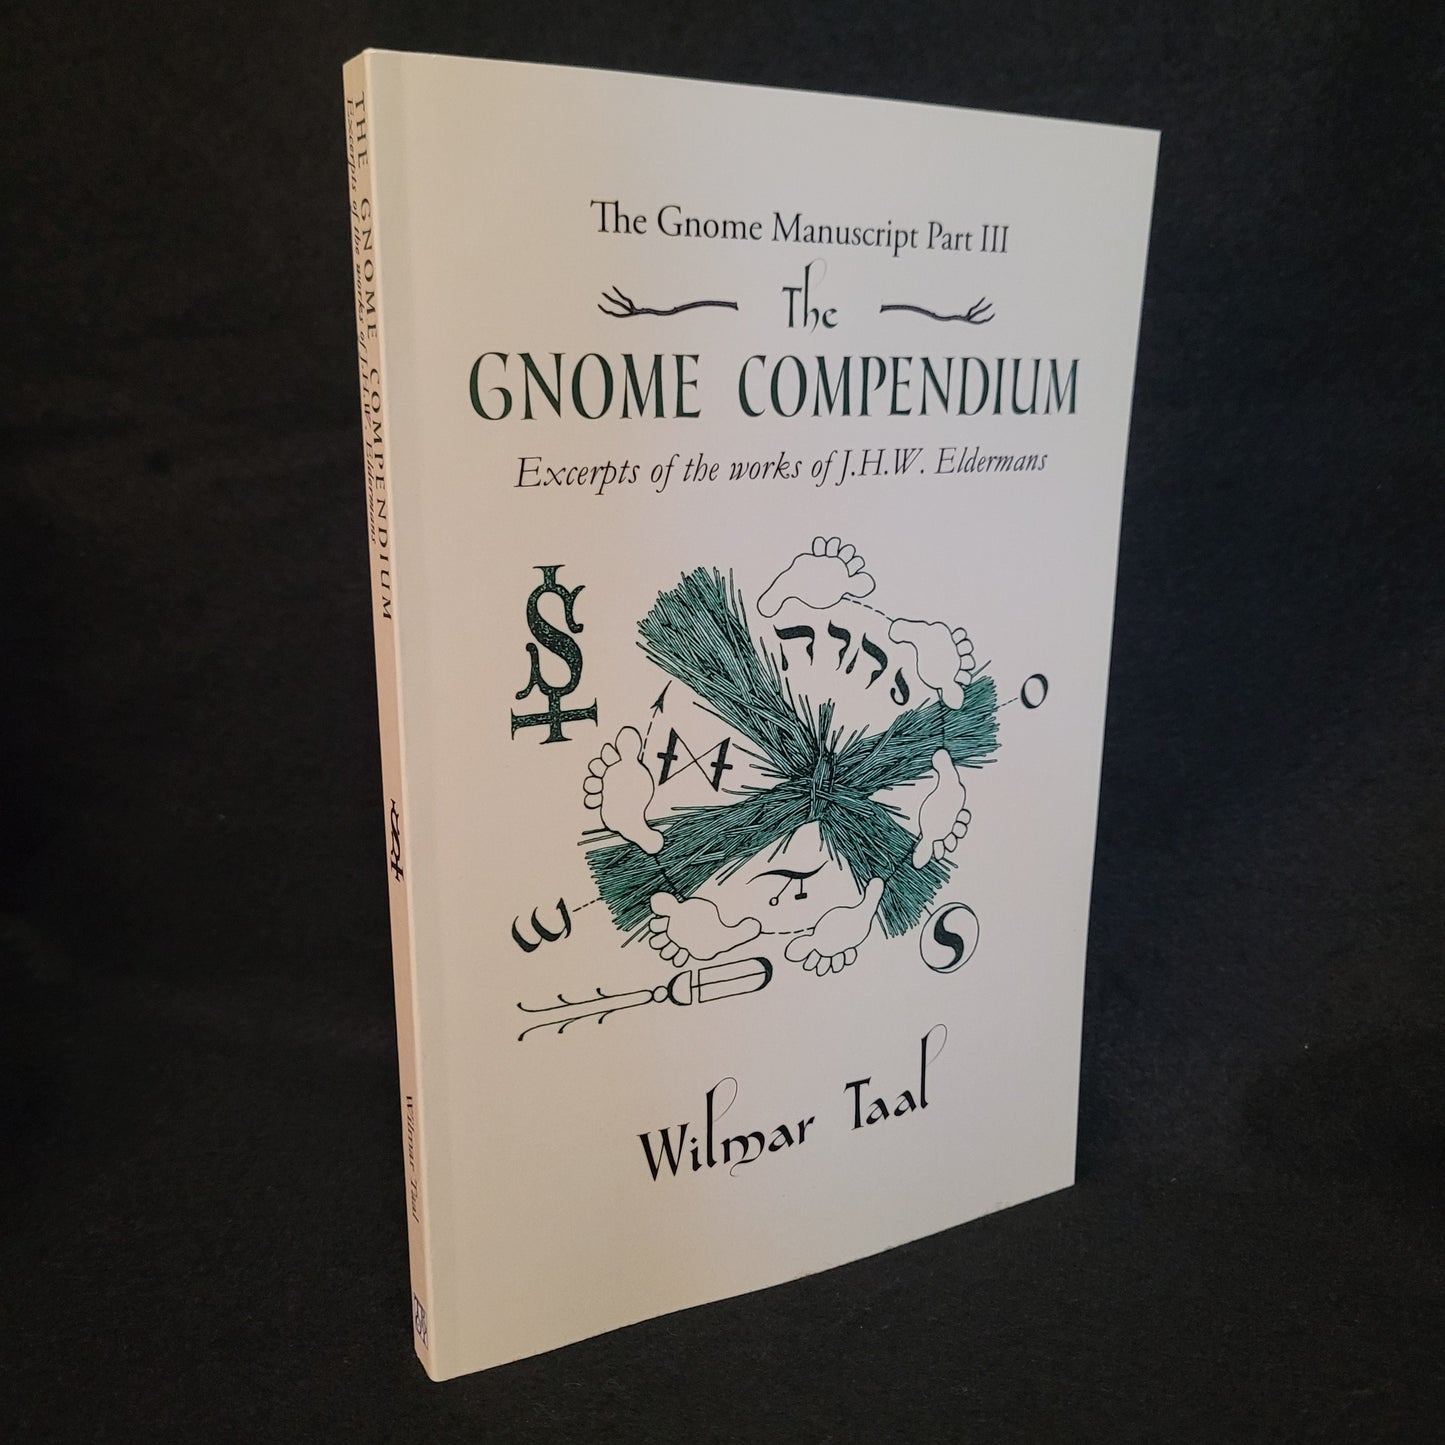 The Gnome Compendium: The Gnome Manuscript Part Three: Excerpts of the works of J.H.W. Eldermans by Wilmar Tal (Troy Books, 2022) Paperback Edition